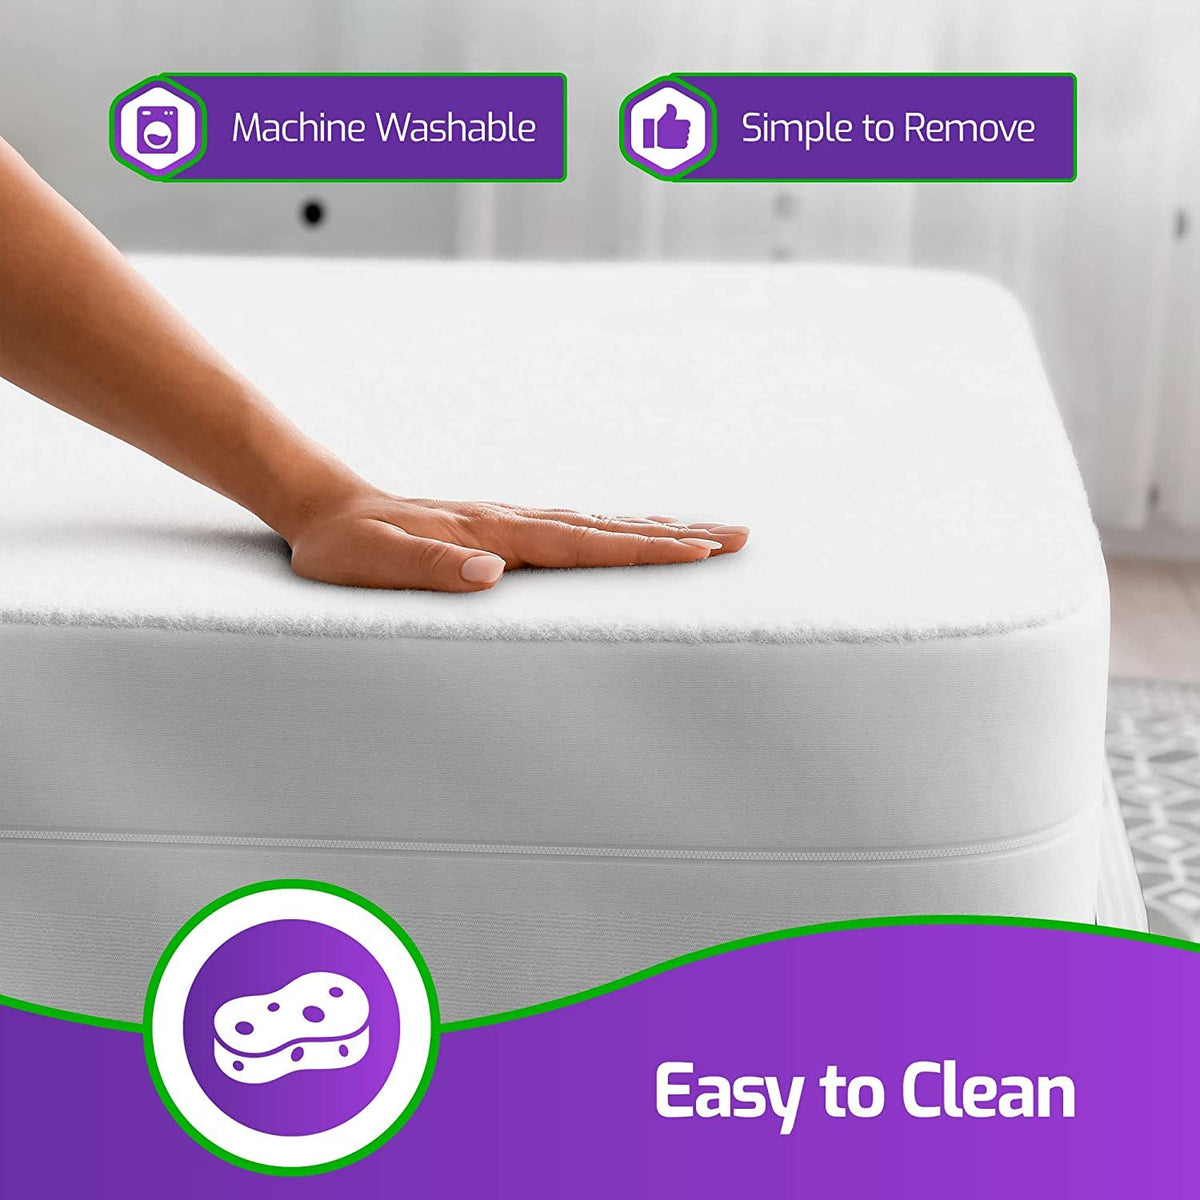 Cotton Mattress Encasement - Ultimate Waterproof Protection and Zippered Closure - Cotton and Vinyl Waterproof Bed Bug Mattress Protector